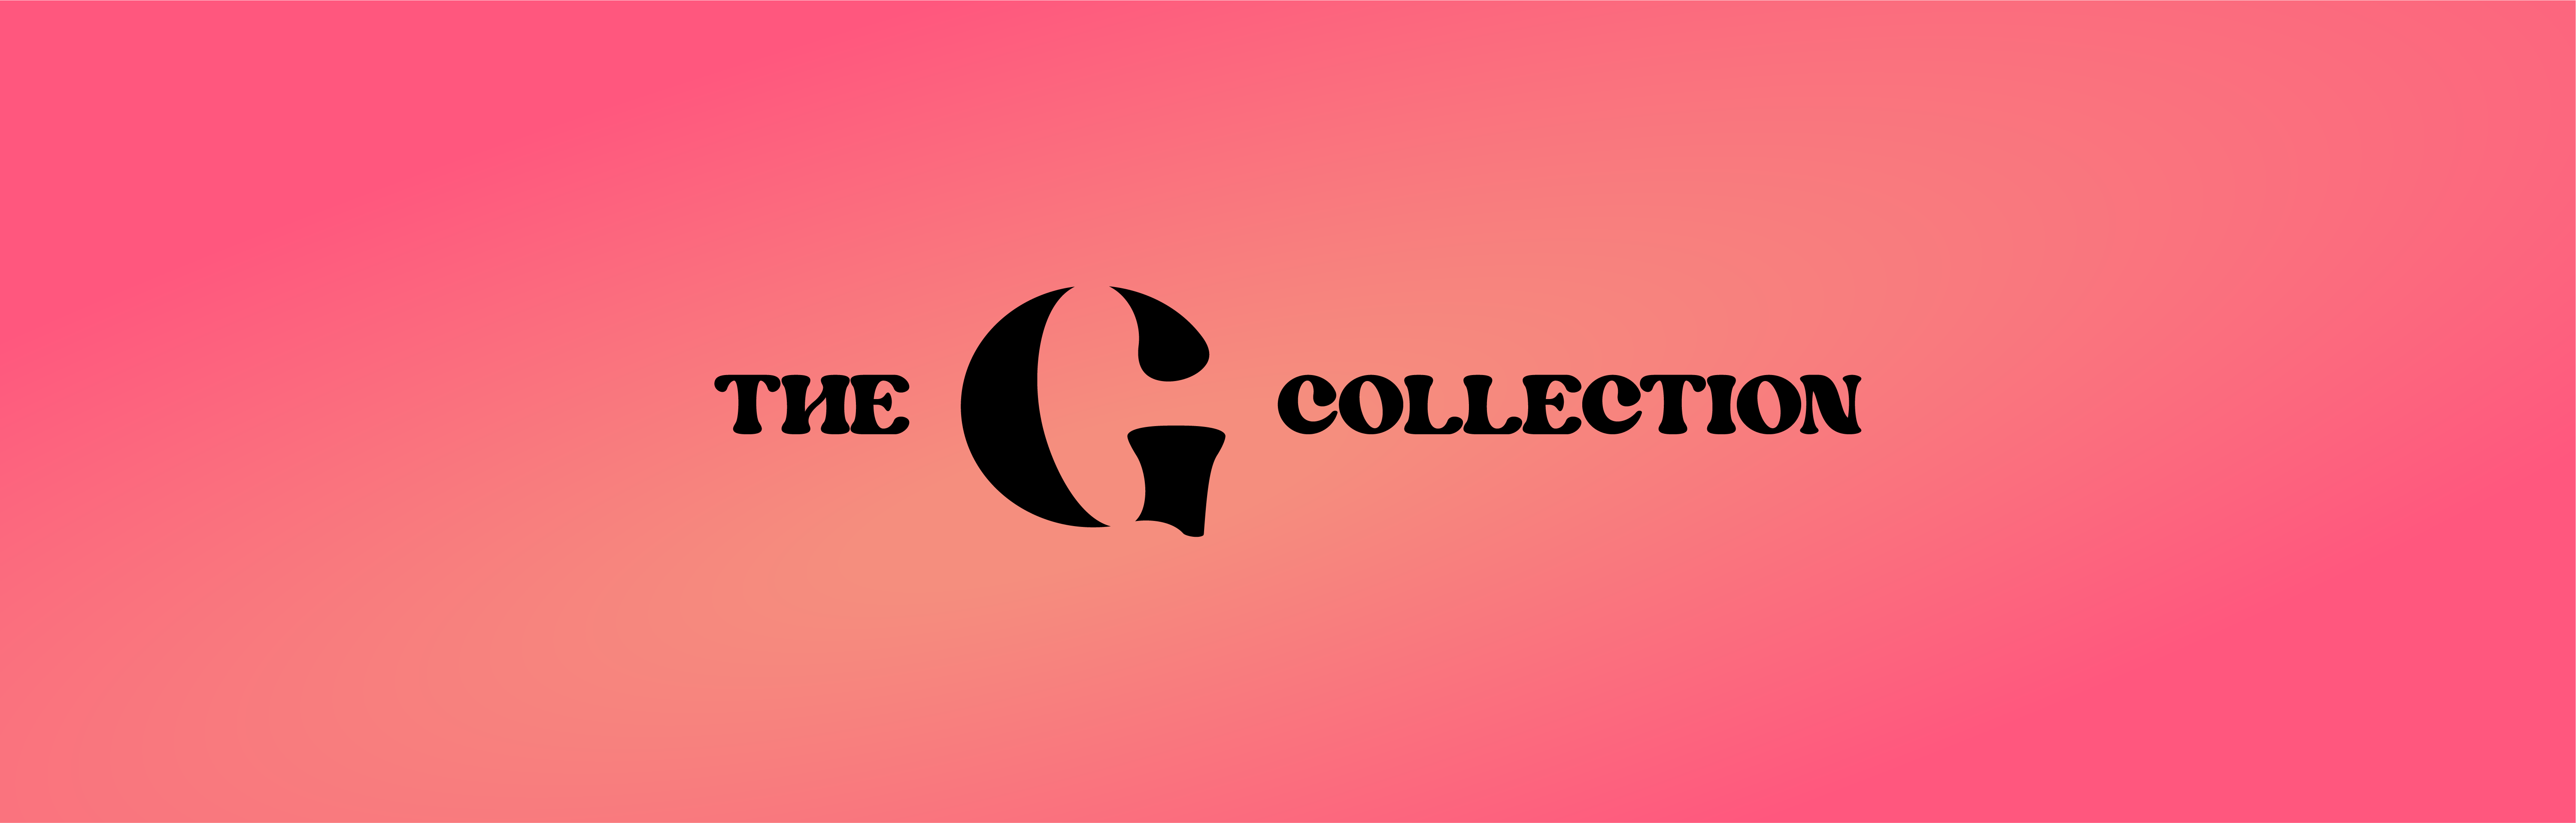 The G Collection banner